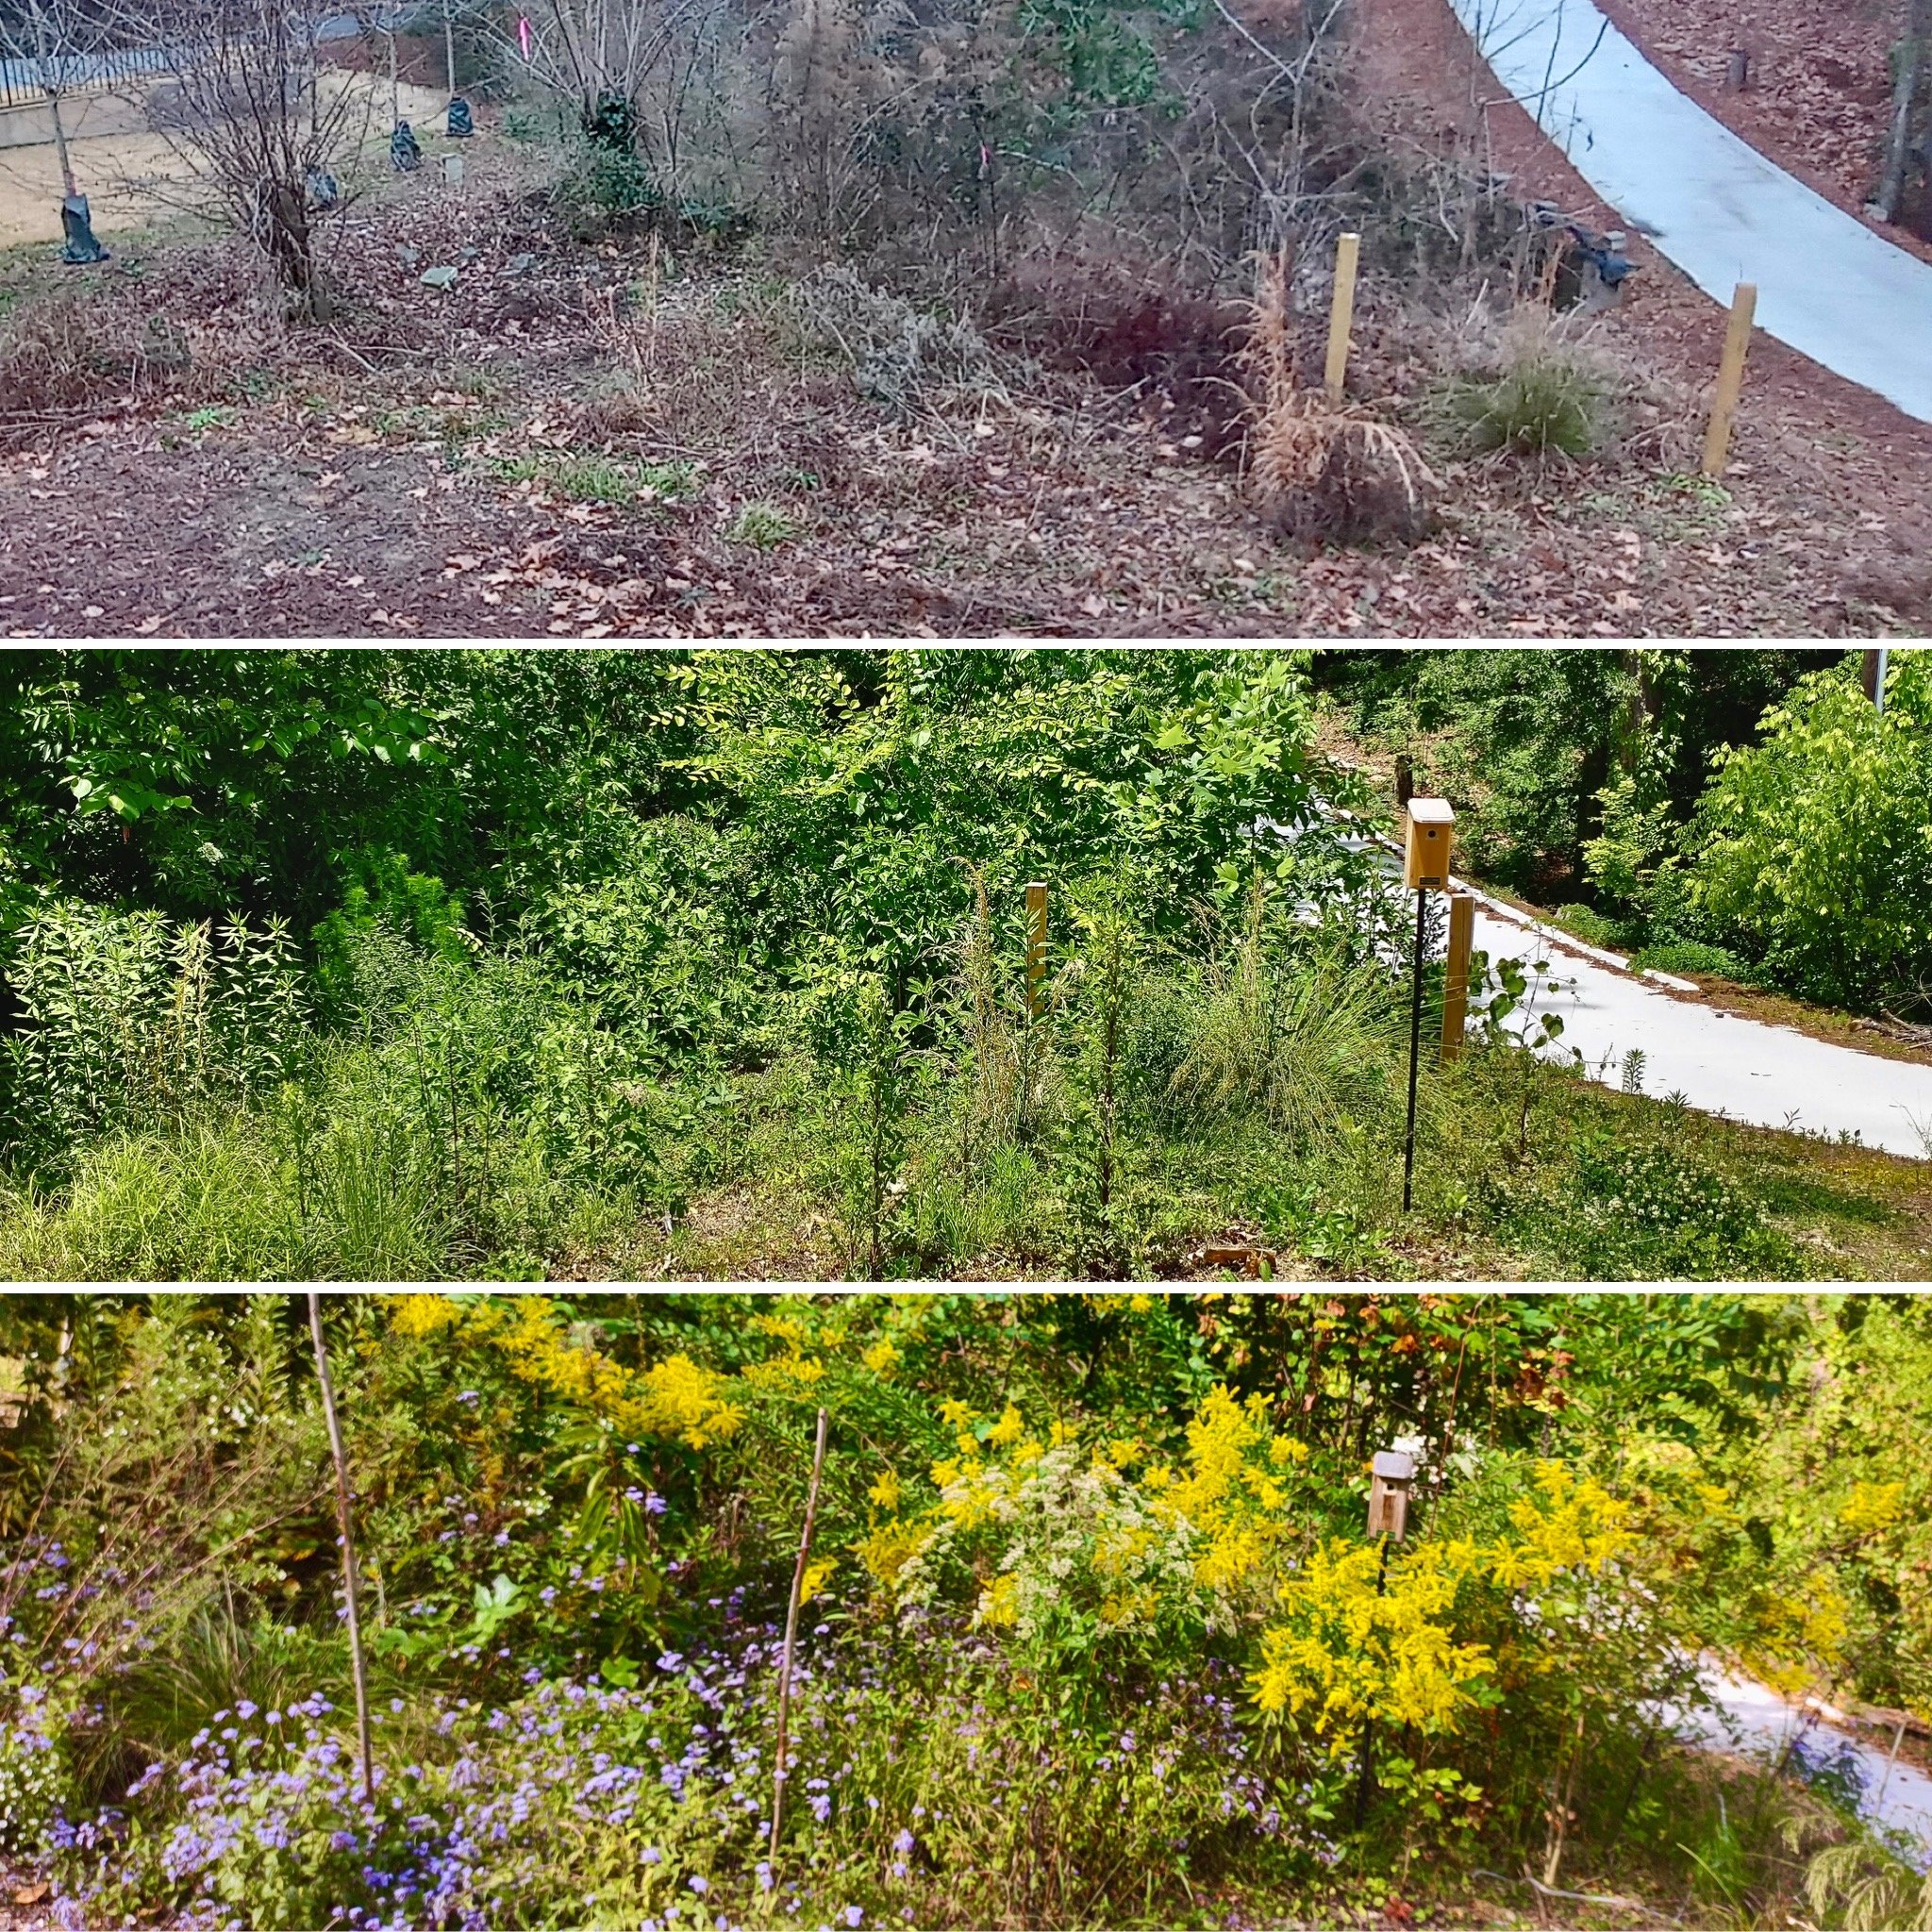  Transition between years can look messy, but is necessary to allow native plant communities to fill in the niches. 